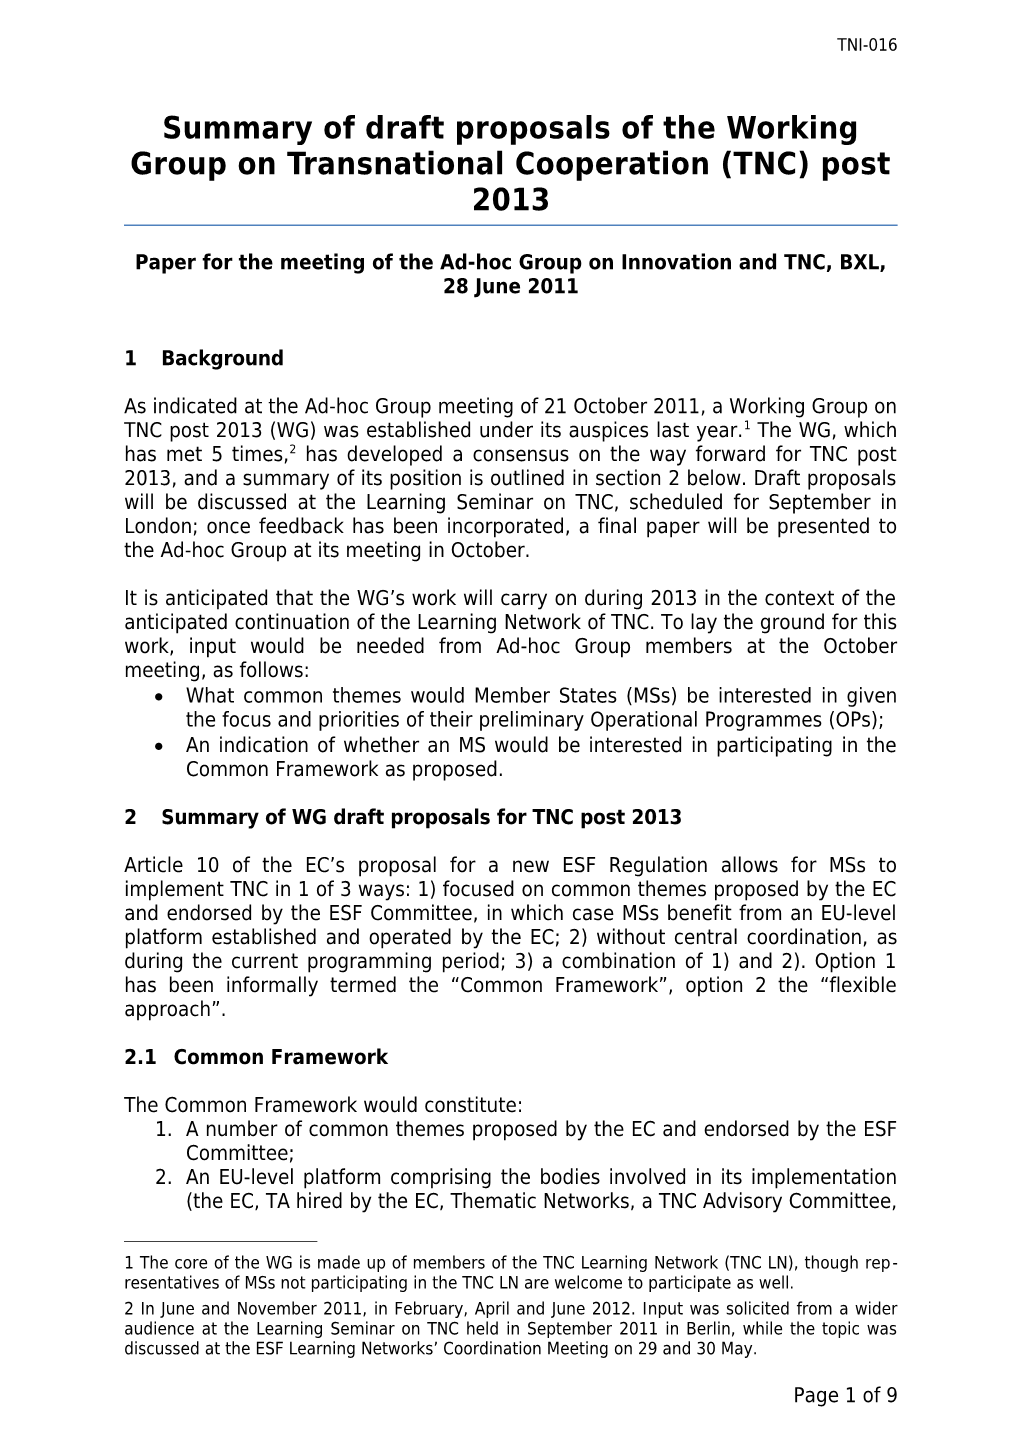 Summary of Draft Proposals of the Working Group on Transnational Cooperation (TNC)Post 2013